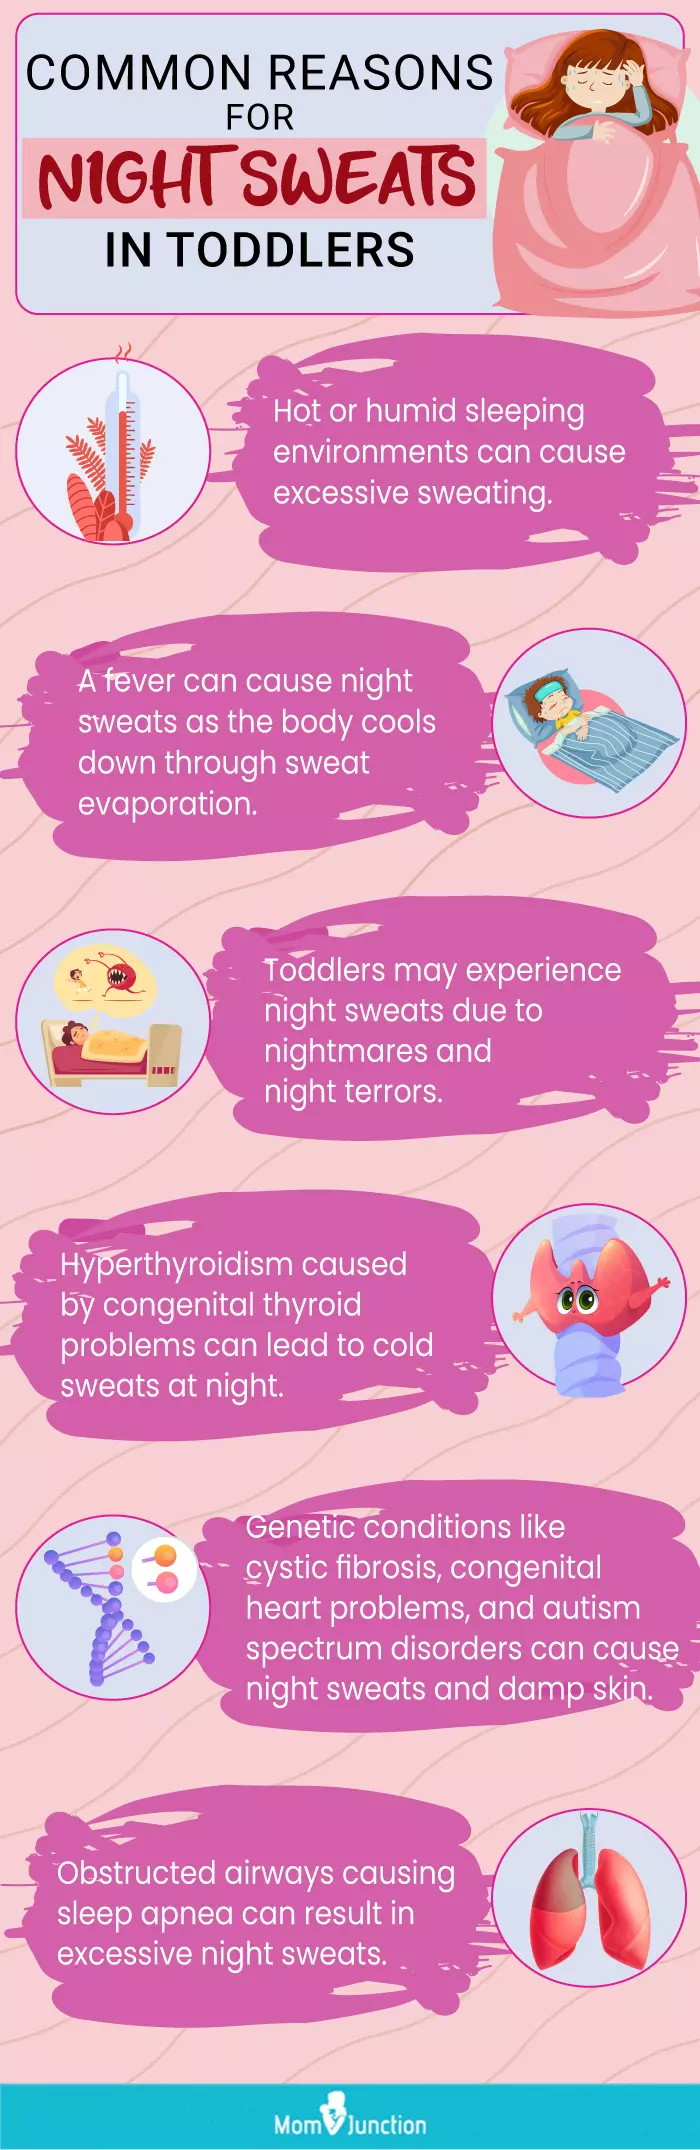 common reasons for night sweats in toddlers (infographic)